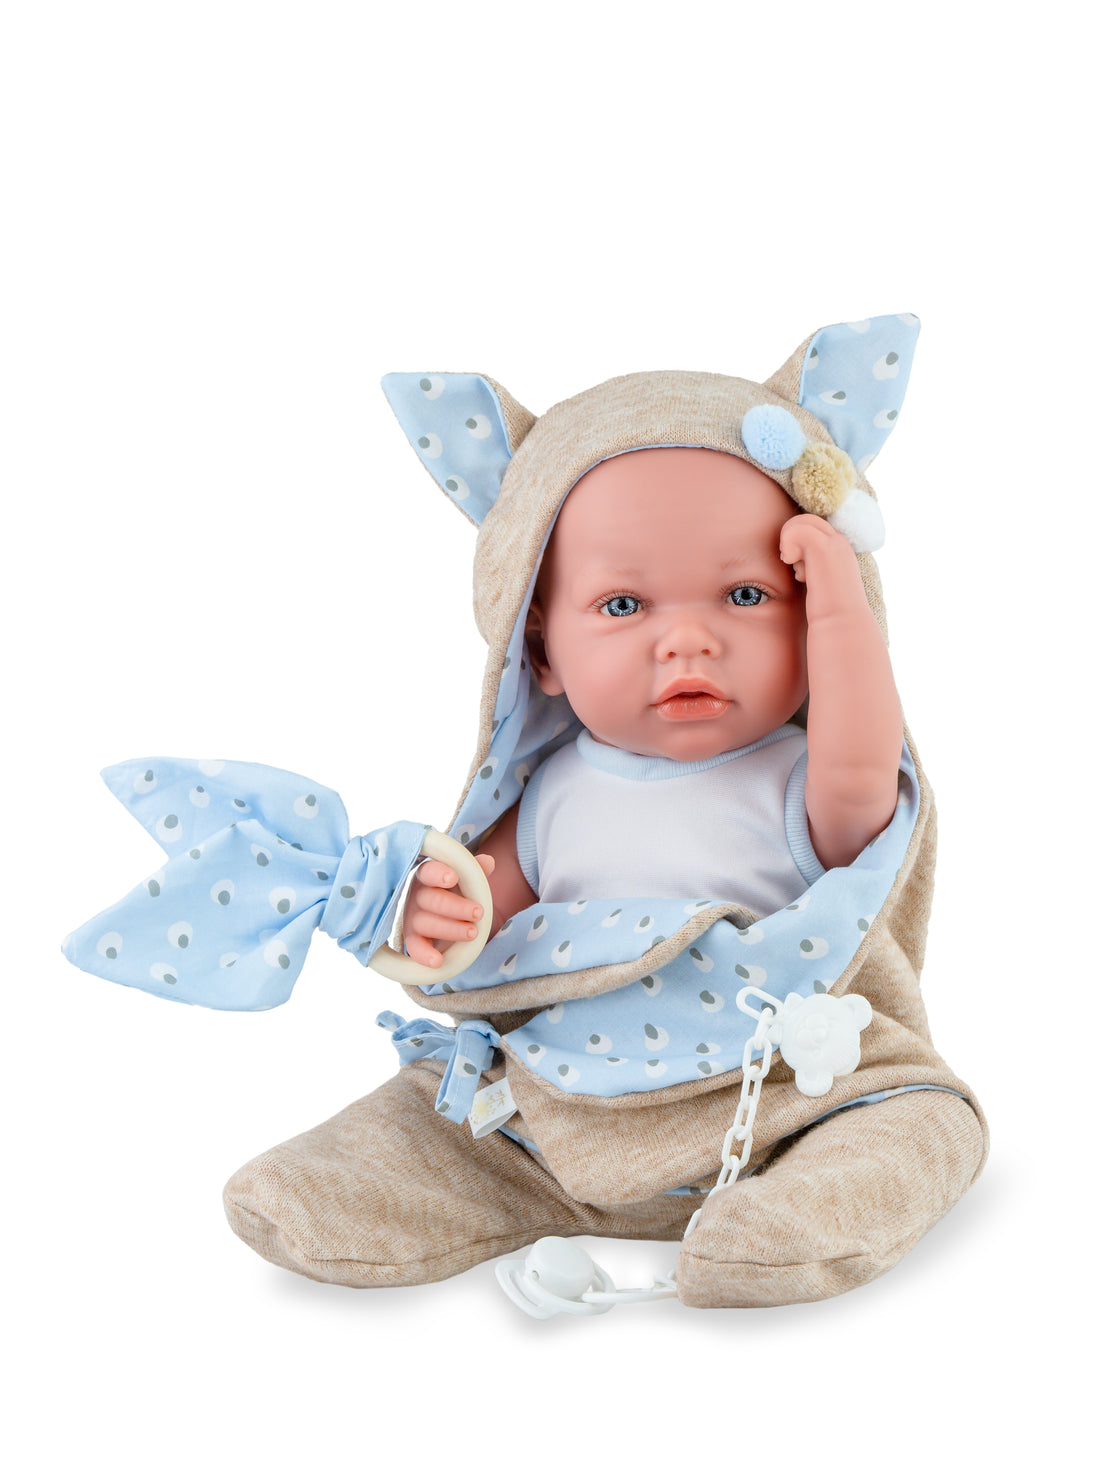 Luka Baby Soft Doll - Dolls and Accessories